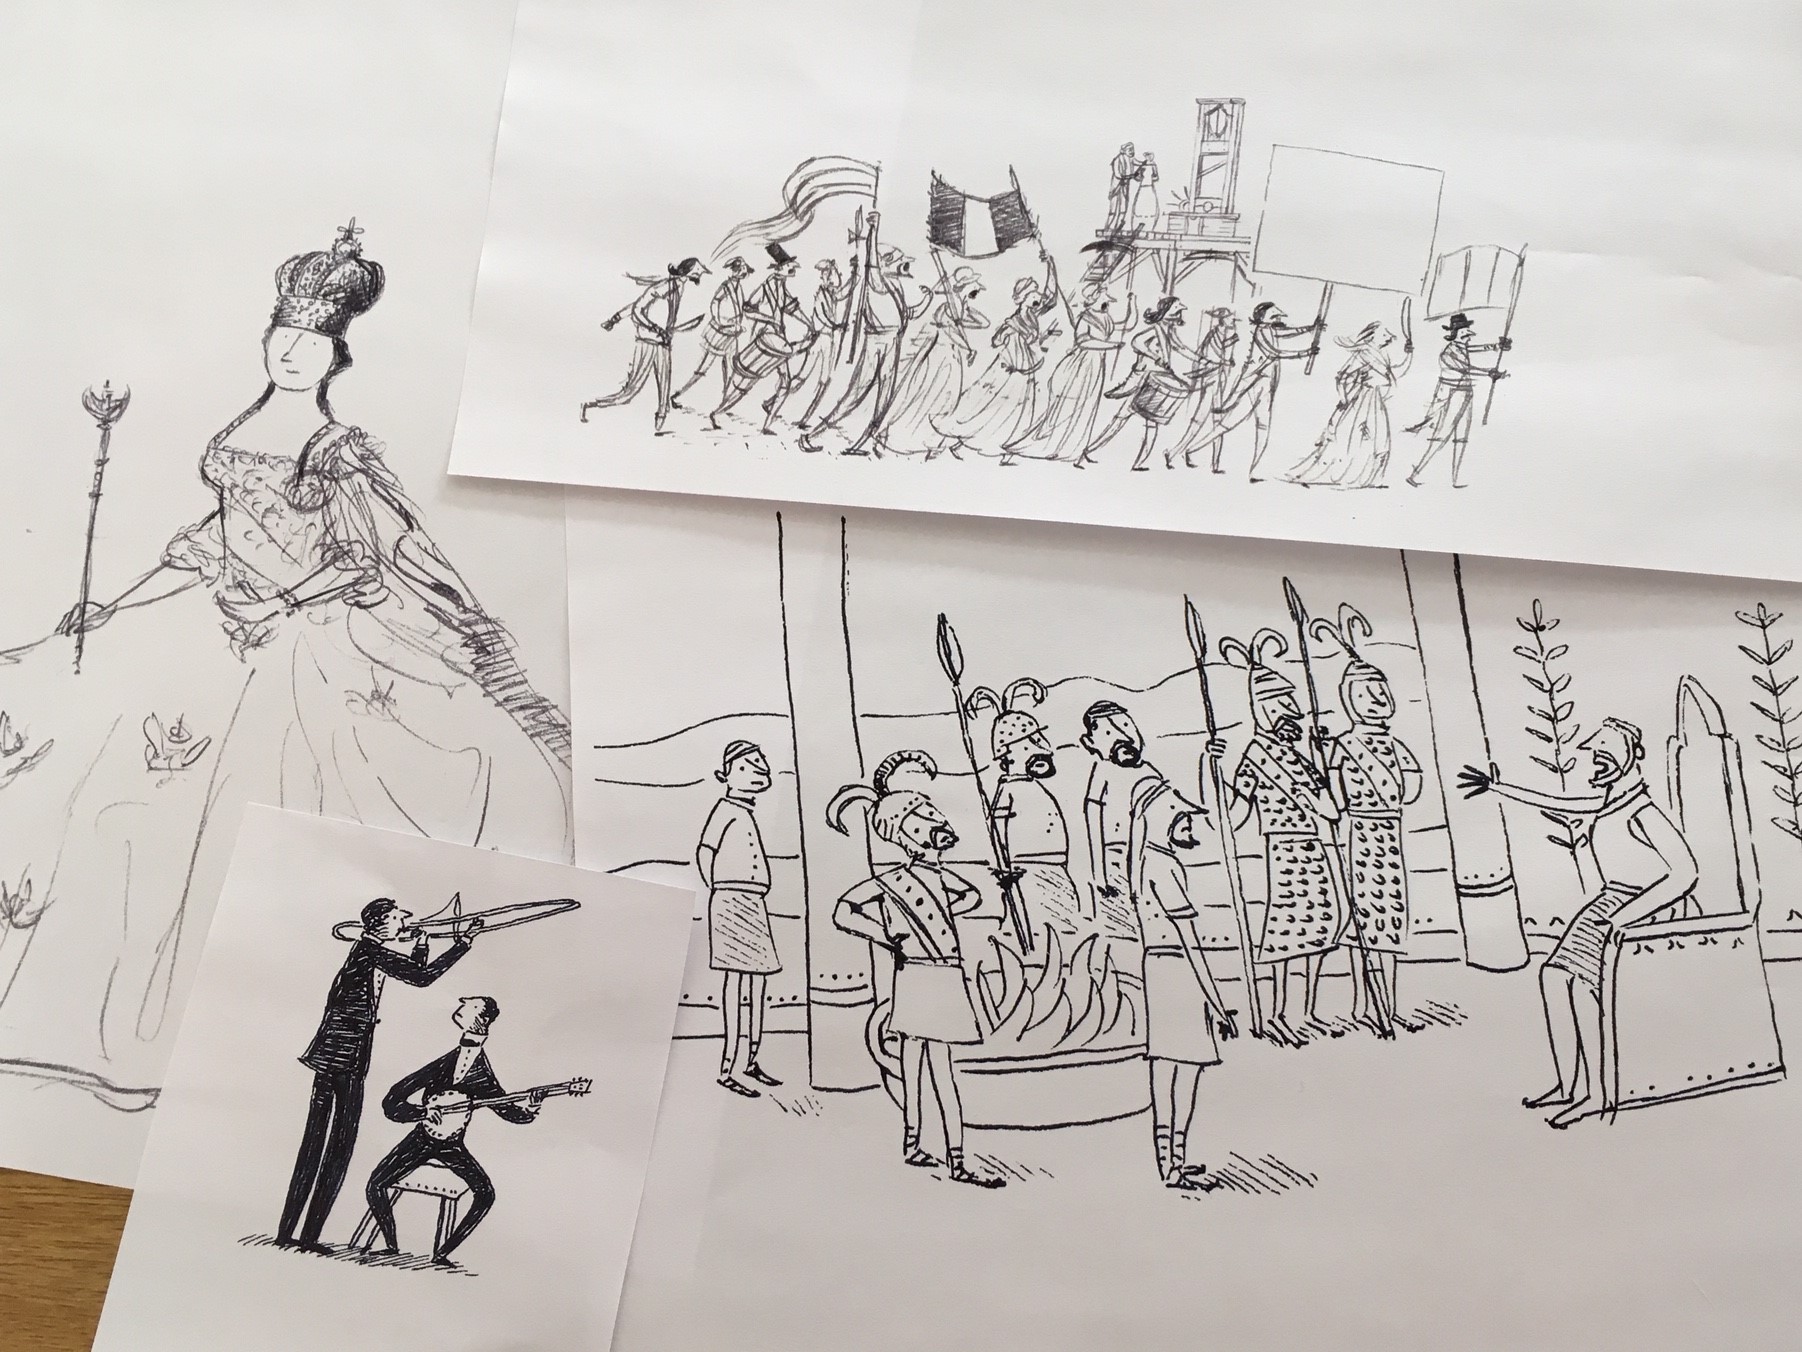 Illustrations and sketches by Adam Larkum, illustrator of A Short History of the World